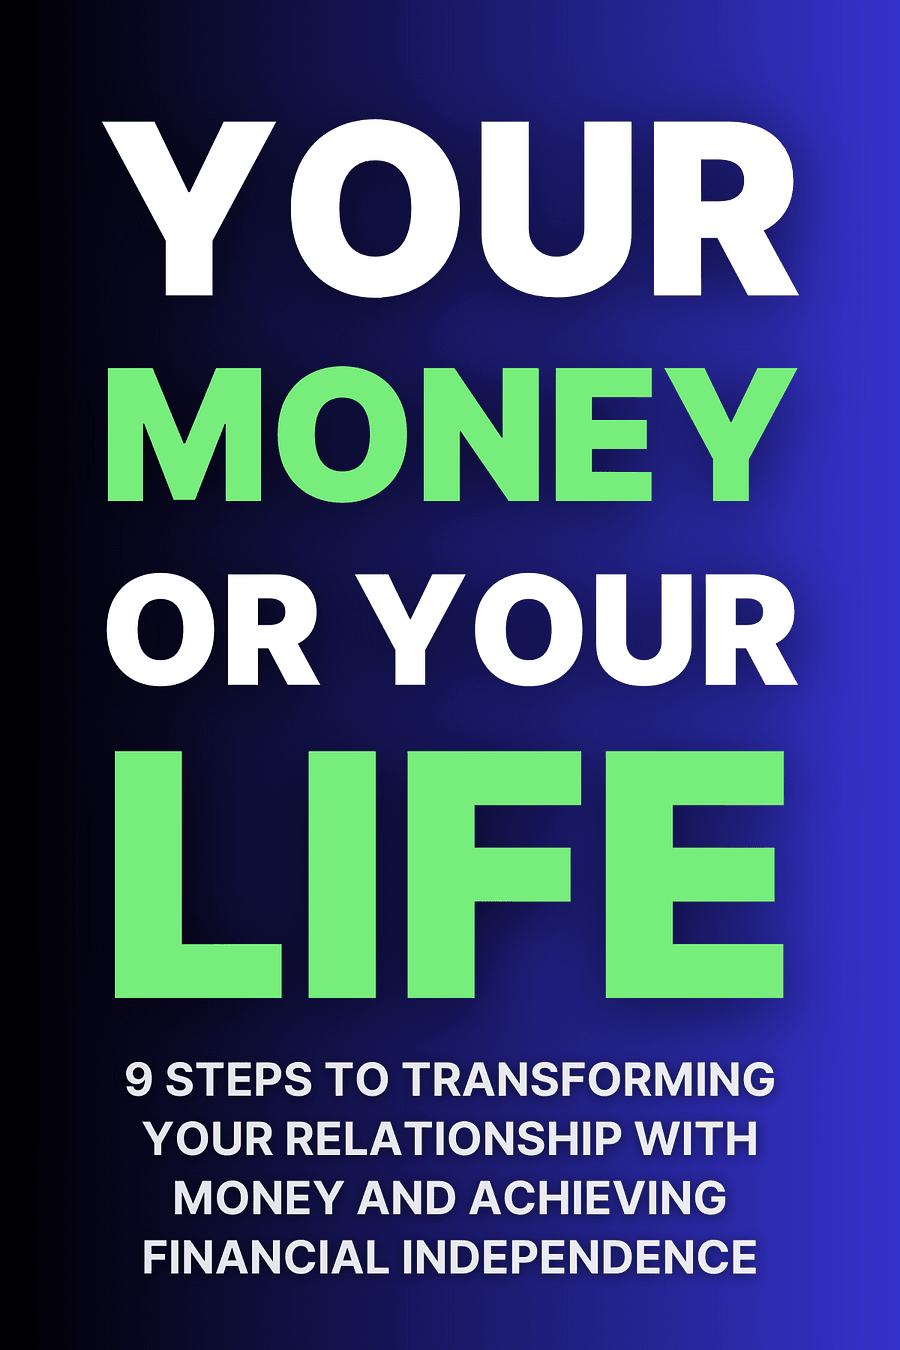 Your Money or Your Life by Vicki Robin, Joe Dominguez - Book Summary